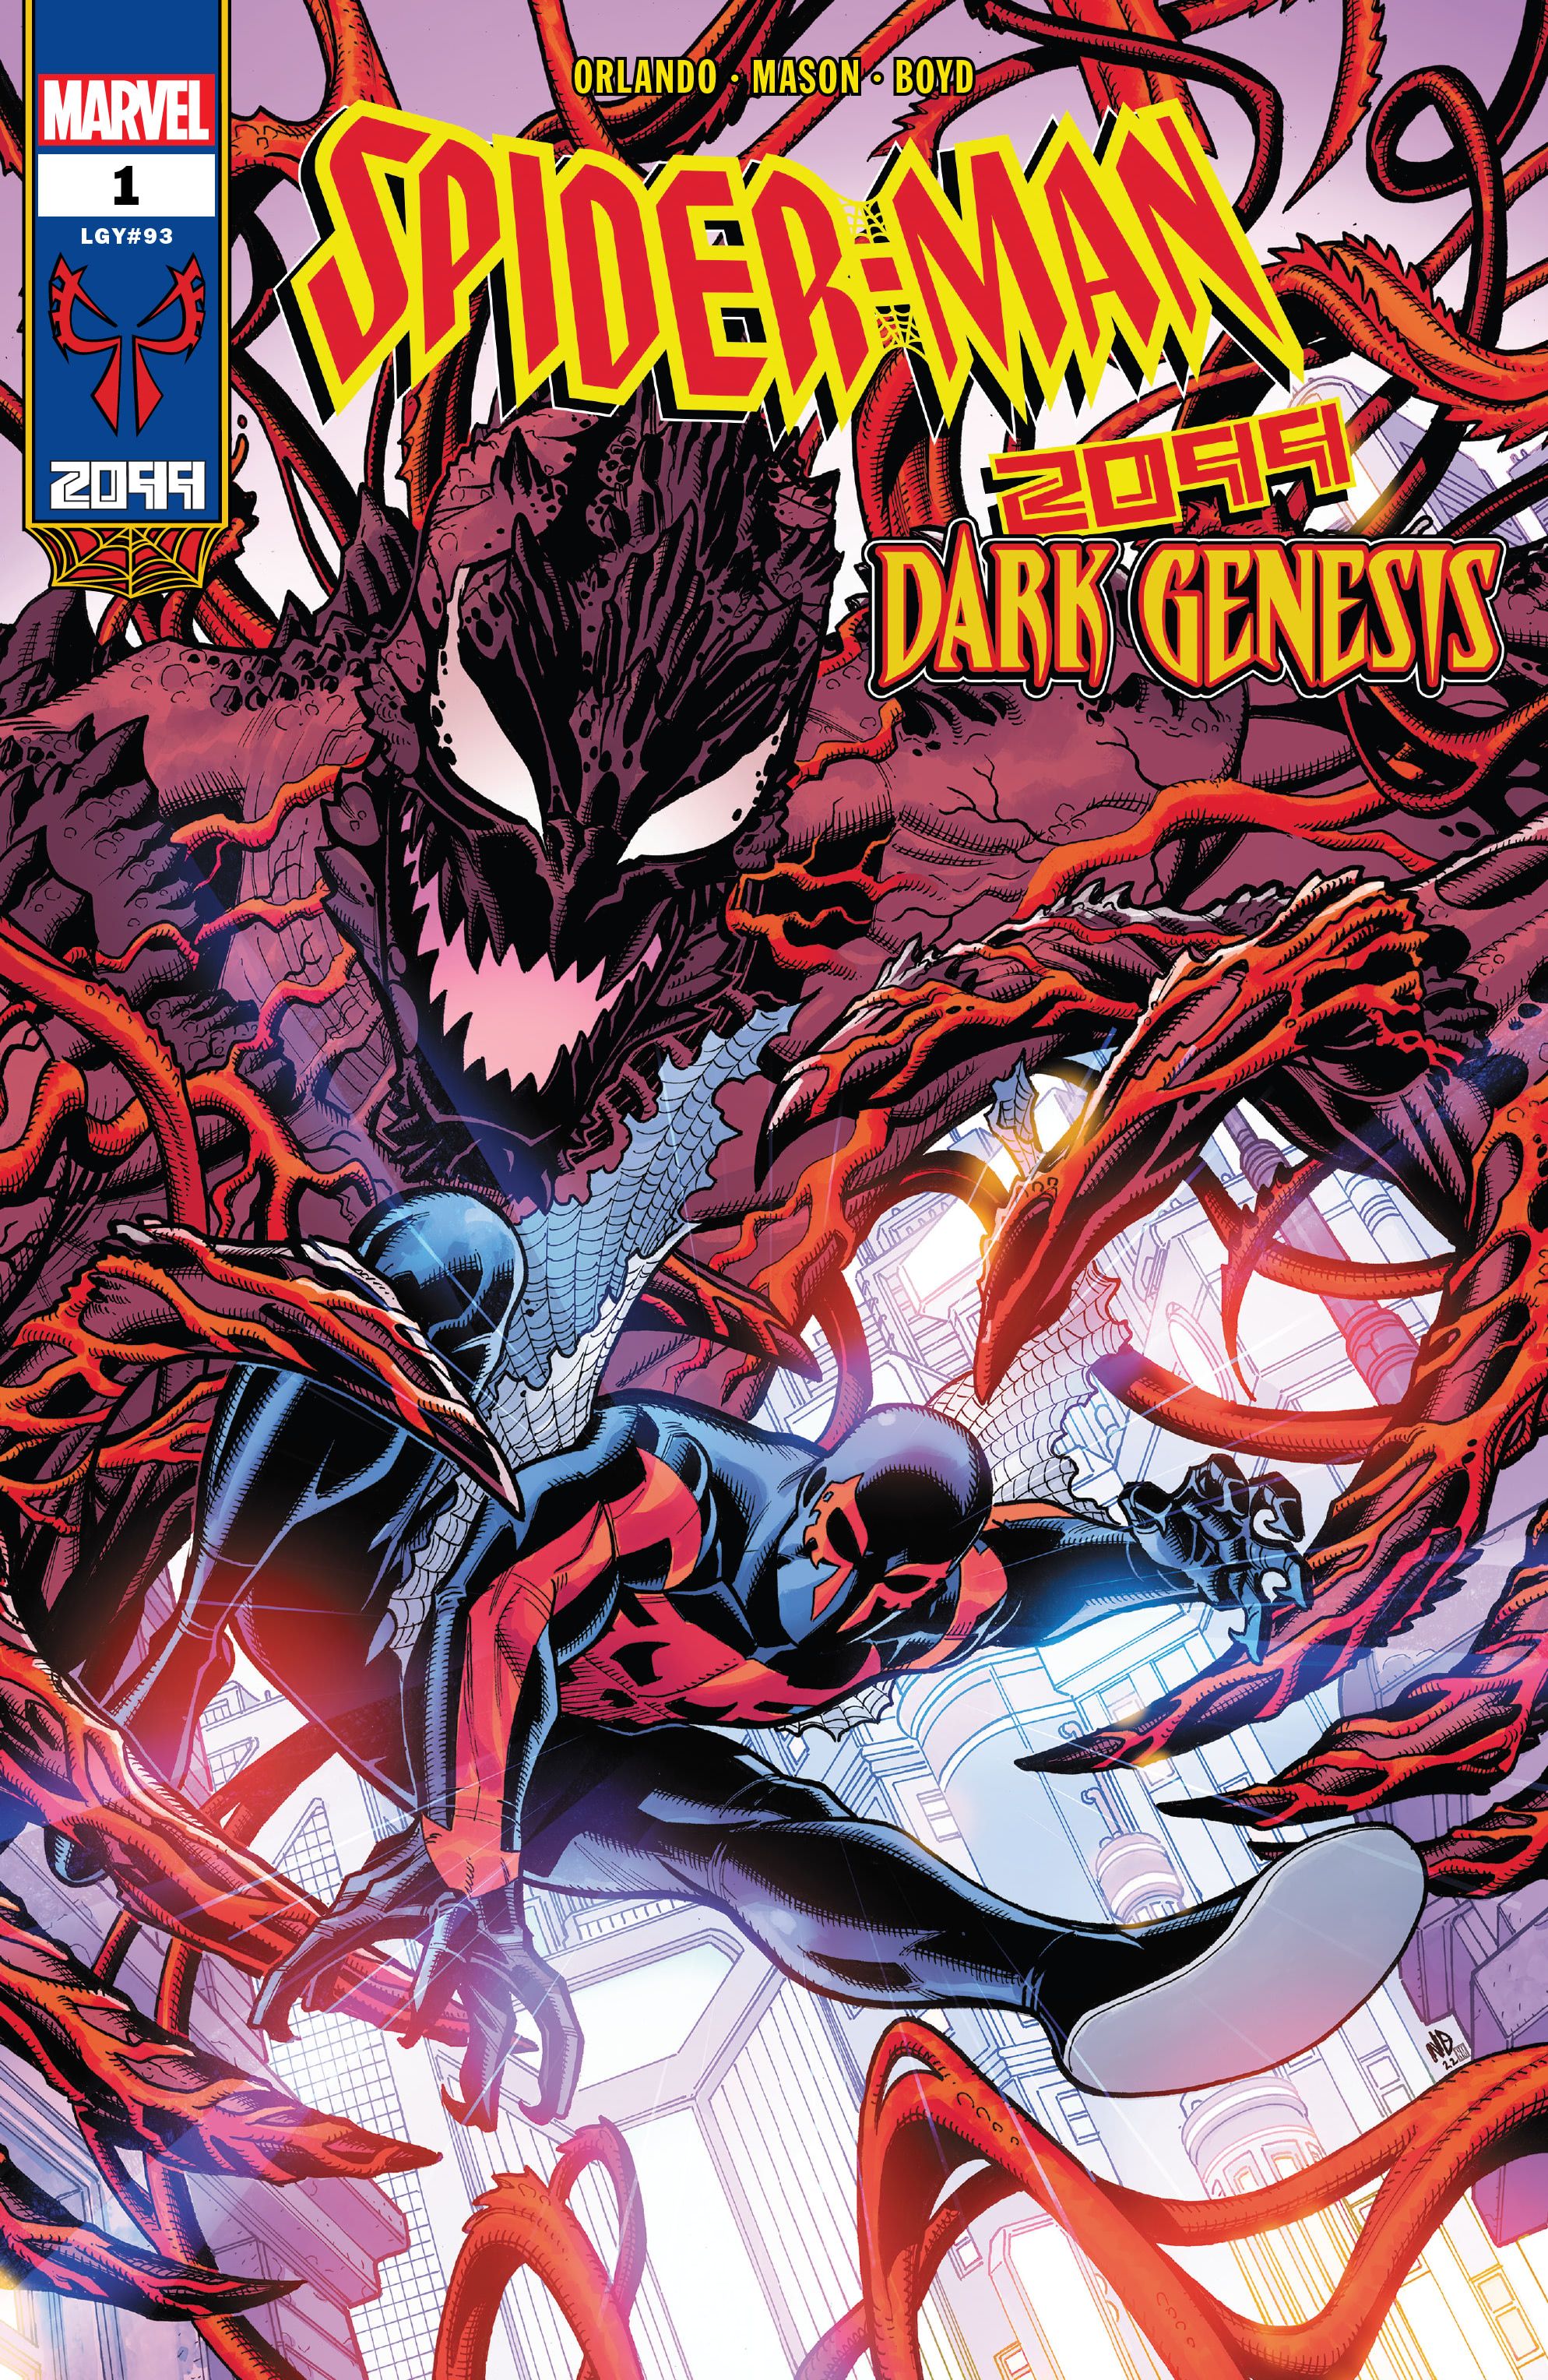 Cover A of Spider-Man 2099 Dark Genesis #1 featuring an enlarged Carnage grabbing Spider-Man 2099 with his claws